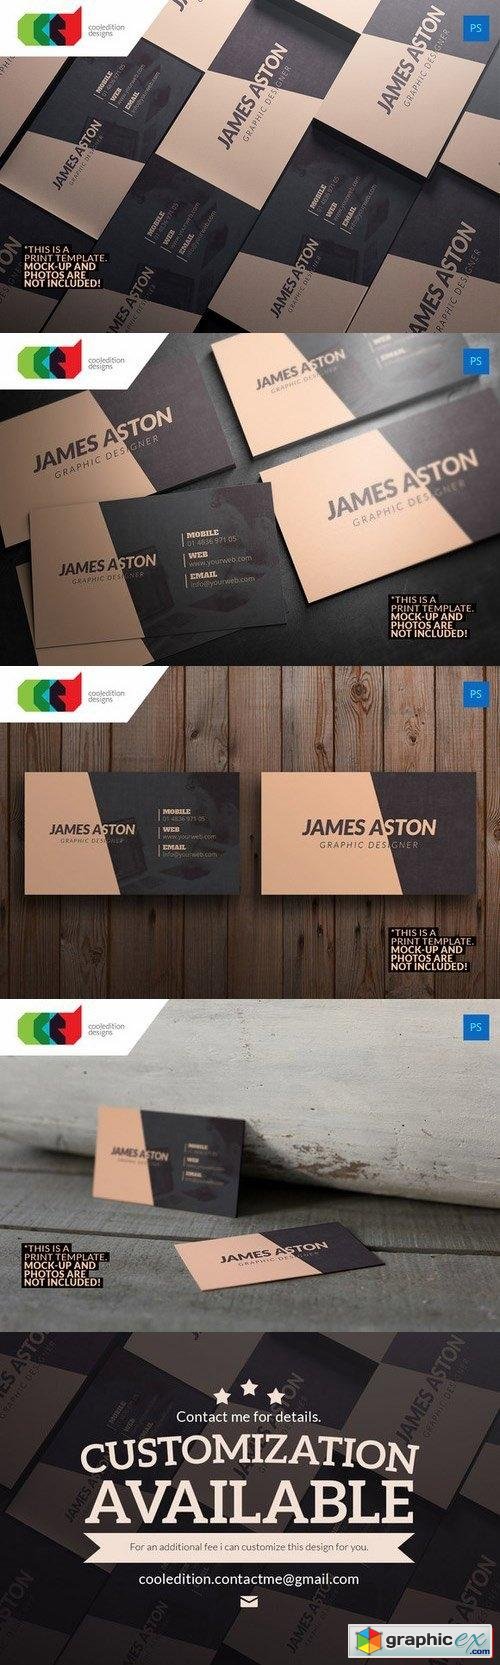 Business Card 10 89127